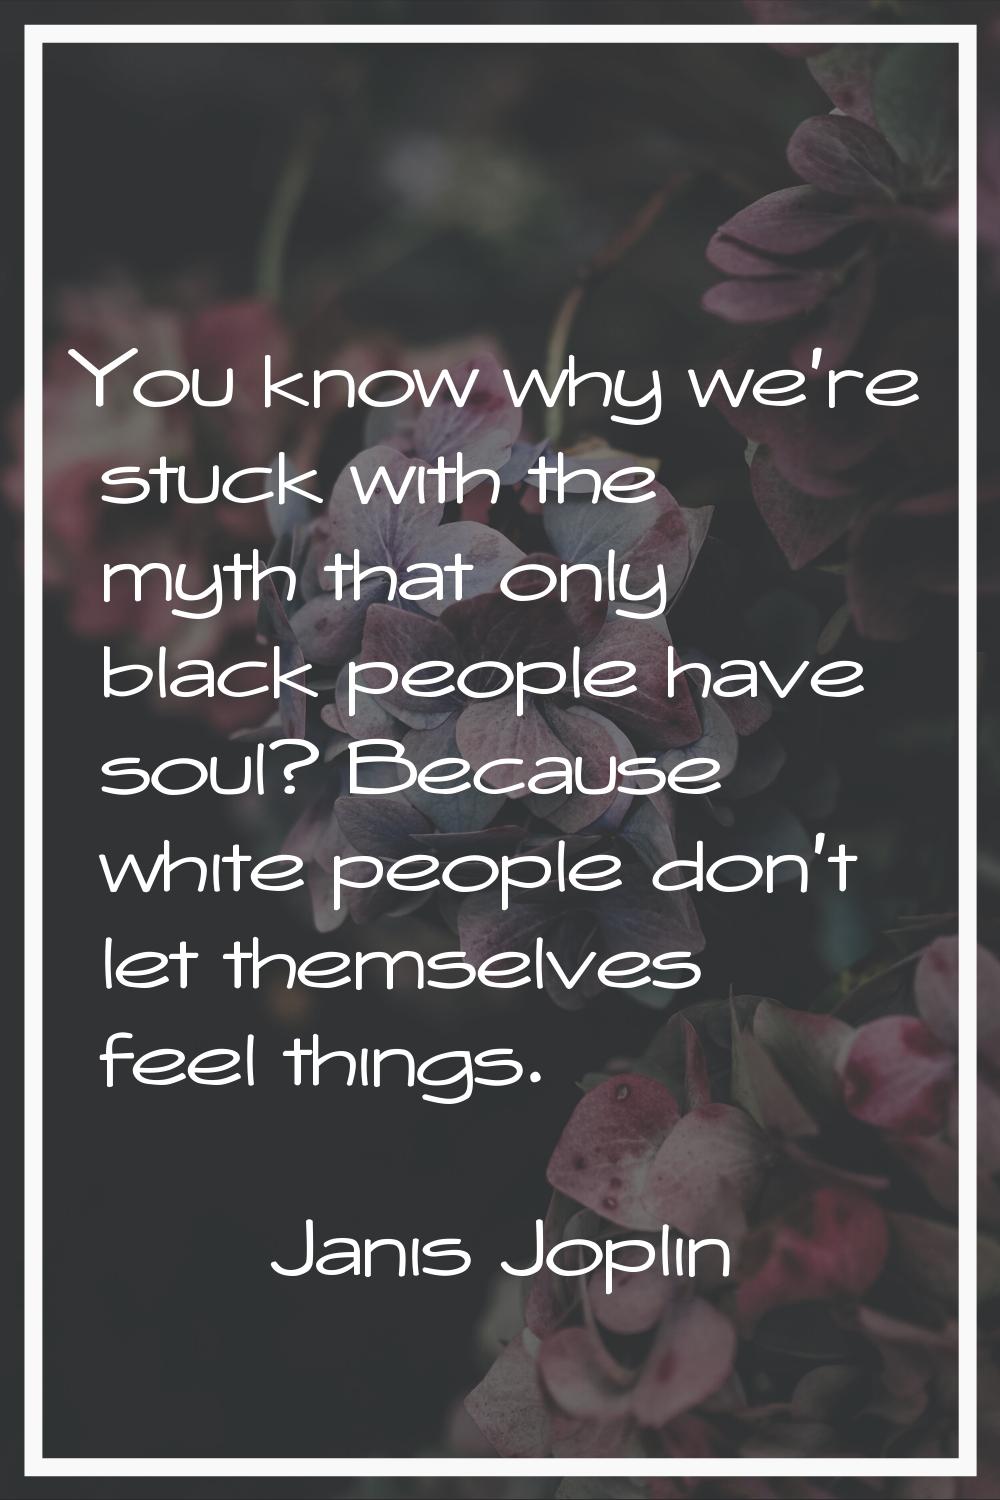 You know why we're stuck with the myth that only black people have soul? Because white people don't